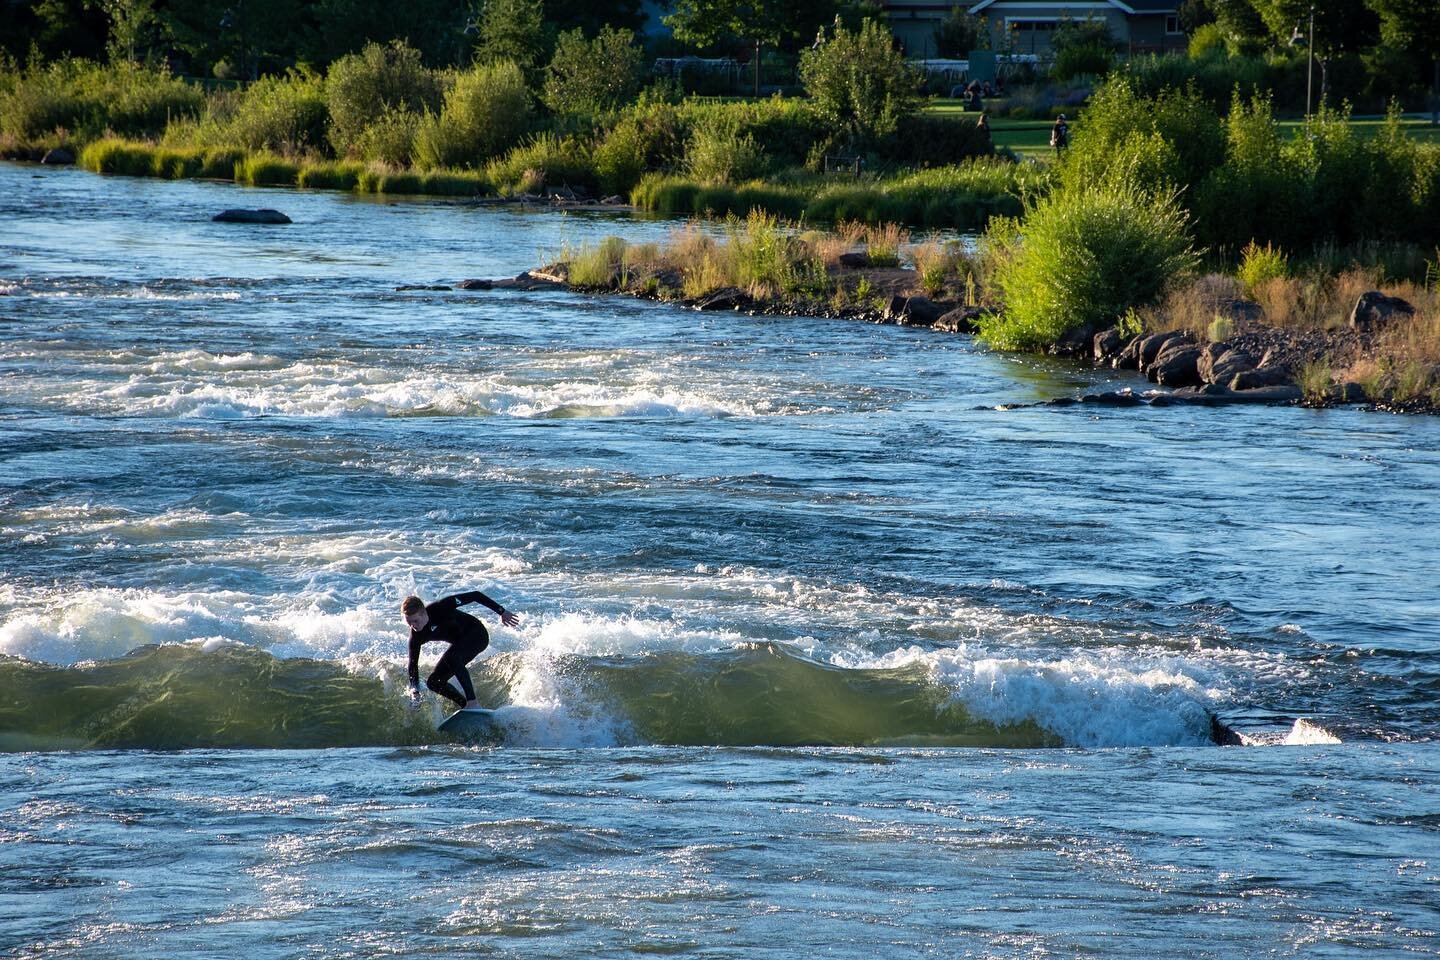 Guaranteed to find surfers wherever I go 📍Bend
.
.
.
.
.
#photography #photographer #photooftheday #travel #igtravel #igdaily #nikon #nikonphotography #nikond5600 #nikonphotographer #landscapephotography #travelphotography #thelightchase #travelpics